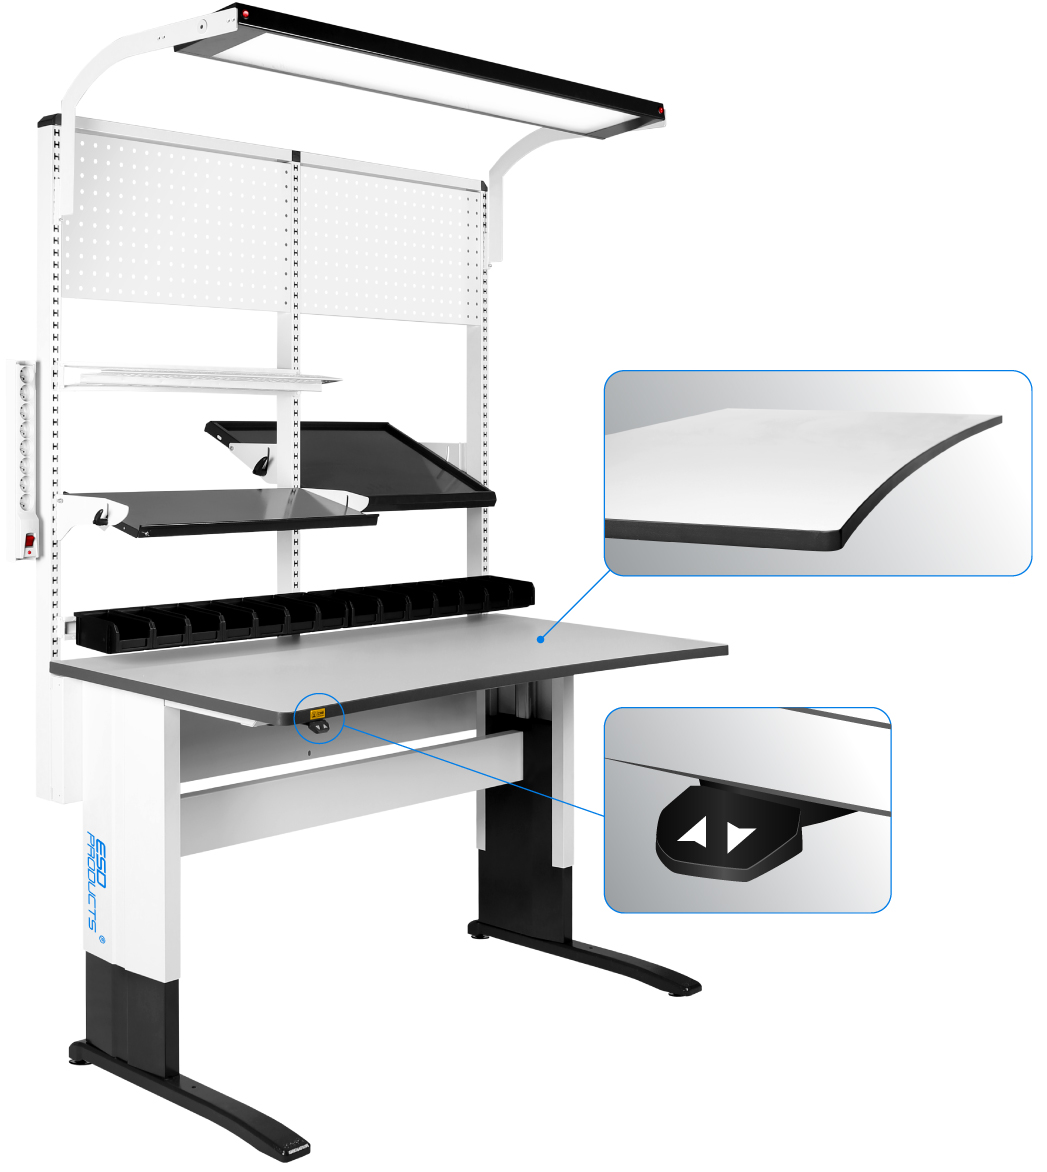 ESD-Workstation-Motorized-Height-Adjustable-Ergonomic-Table-Top-Reeco-Robert-1830-x-800-mm-ESD-Products-AES